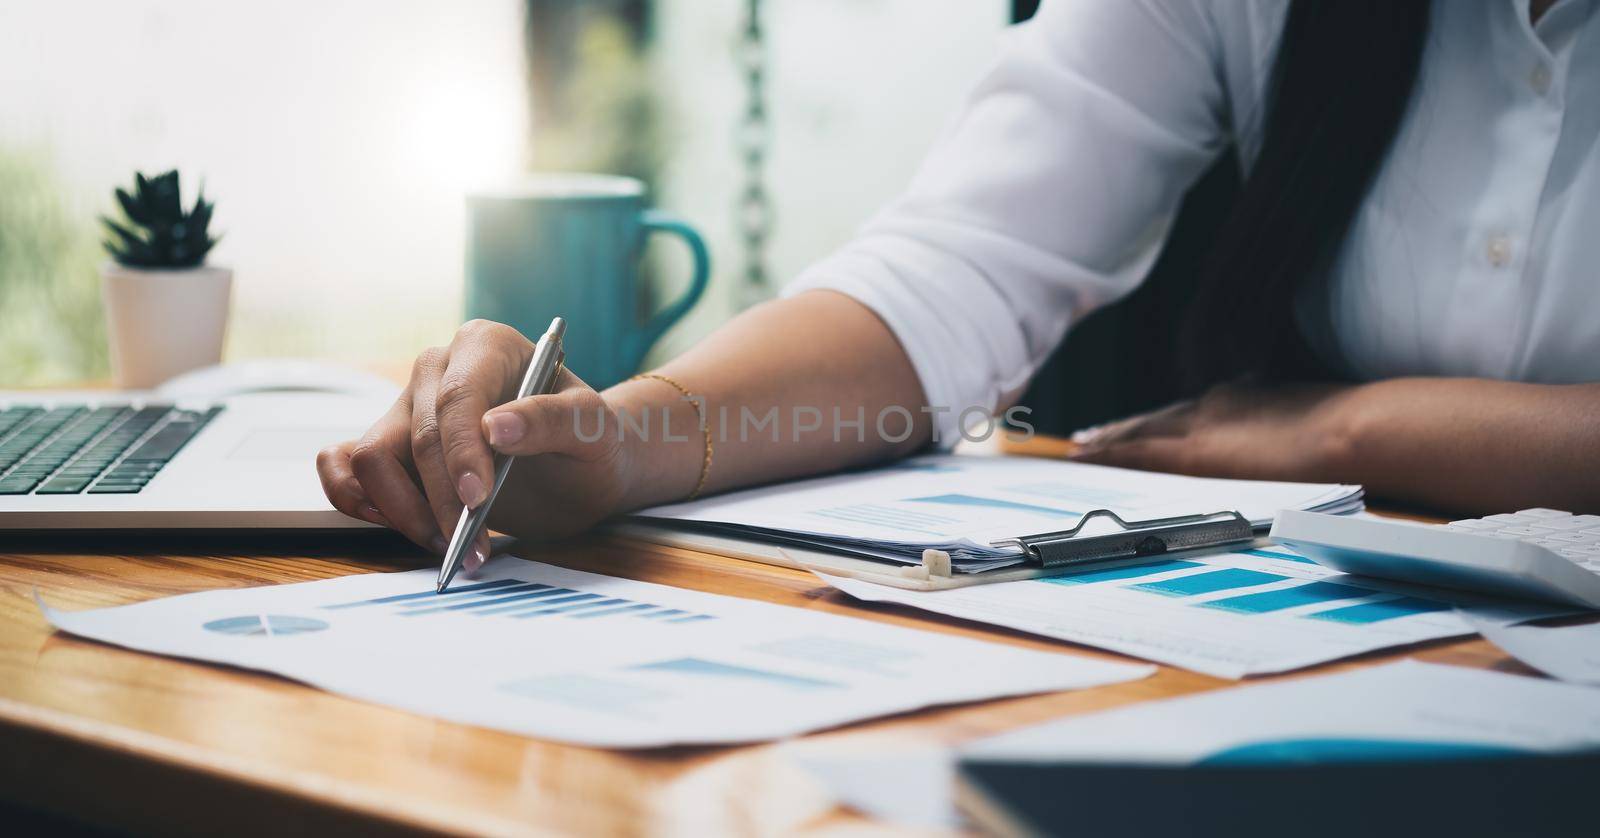 Business analyst working - hand with pen, calculator, coffee, magnifier, worksheet and graph, business financial concept.